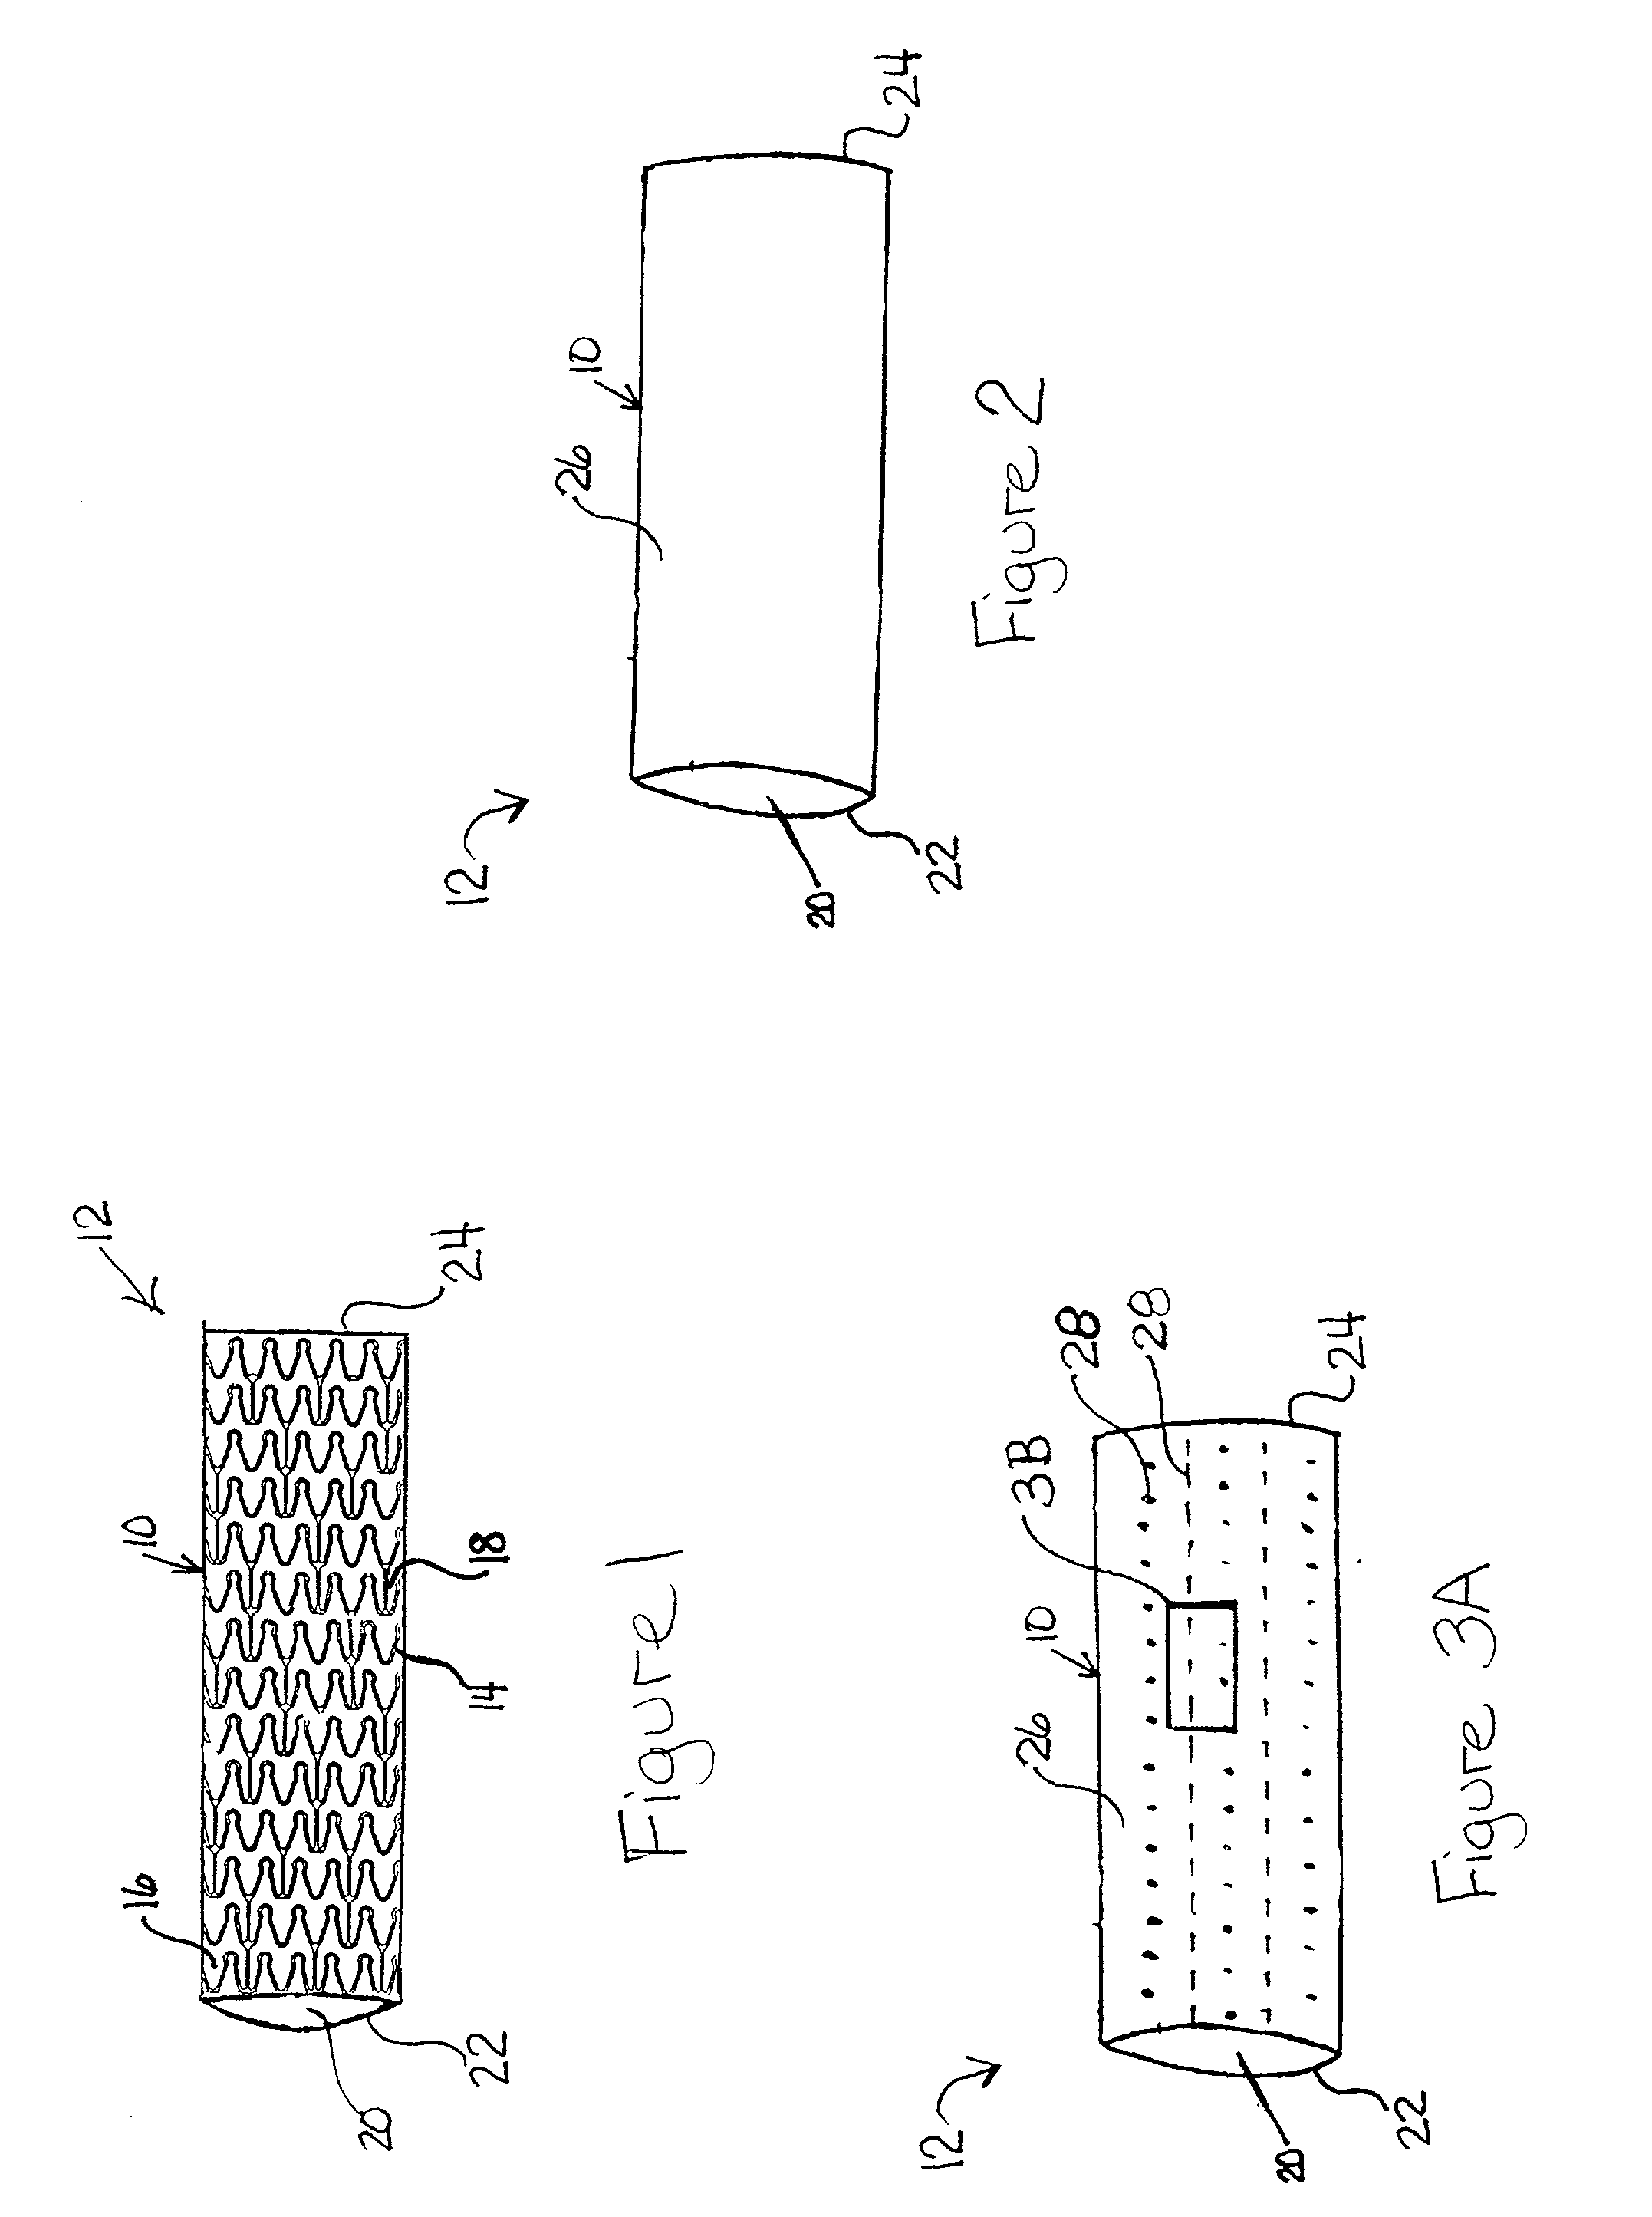 Sheath for a prosthesis and methods of forming the same